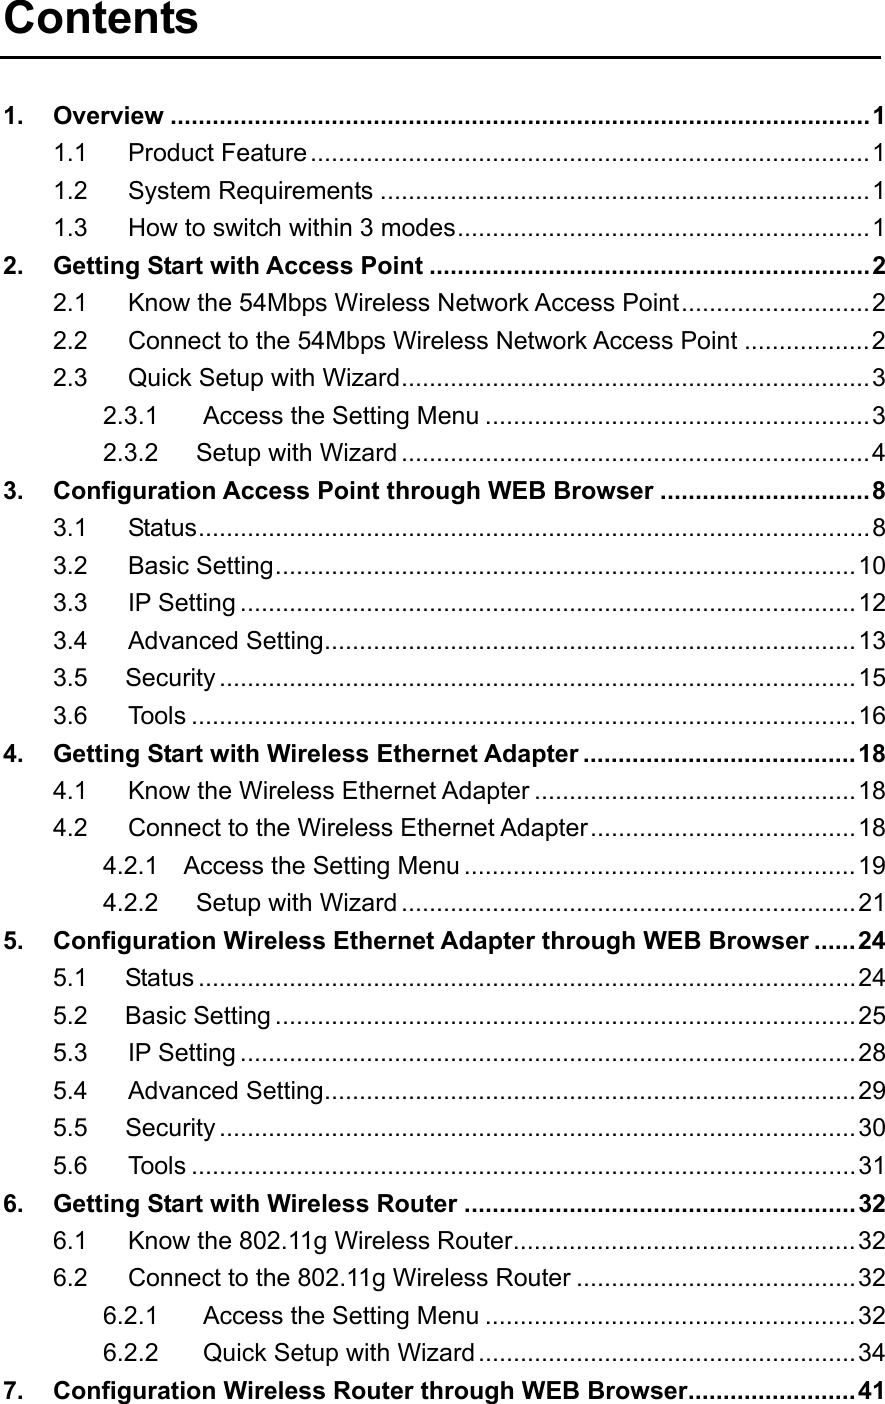 Contents  1. Overview ....................................................................................................1 1.1 Product Feature................................................................................1 1.2 System Requirements ......................................................................1 1.3 How to switch within 3 modes...........................................................1 2. Getting Start with Access Point ...............................................................2 2.1 Know the 54Mbps Wireless Network Access Point...........................2 2.2 Connect to the 54Mbps Wireless Network Access Point ..................2 2.3 Quick Setup with Wizard...................................................................3 2.3.1 Access the Setting Menu .......................................................3 2.3.2   Setup with Wizard ...................................................................4 3. Configuration Access Point through WEB Browser ..............................8 3.1 Status................................................................................................8 3.2 Basic Setting...................................................................................10 3.3 IP Setting ........................................................................................12 3.4 Advanced Setting............................................................................13 3.5   Security ...........................................................................................15 3.6 Tools ...............................................................................................16 4. Getting Start with Wireless Ethernet Adapter .......................................18 4.1 Know the Wireless Ethernet Adapter ..............................................18 4.2 Connect to the Wireless Ethernet Adapter......................................18 4.2.1    Access the Setting Menu ........................................................19 4.2.2   Setup with Wizard .................................................................21 5. Configuration Wireless Ethernet Adapter through WEB Browser ......24 5.1   Status ..............................................................................................24 5.2   Basic Setting ...................................................................................25 5.3 IP Setting ........................................................................................28 5.4 Advanced Setting............................................................................29 5.5   Security ...........................................................................................30 5.6 Tools ...............................................................................................31 6. Getting Start with Wireless Router ........................................................32 6.1 Know the 802.11g Wireless Router.................................................32 6.2 Connect to the 802.11g Wireless Router ........................................32 6.2.1 Access the Setting Menu .....................................................32 6.2.2 Quick Setup with Wizard......................................................34 7. Configuration Wireless Router through WEB Browser........................41 